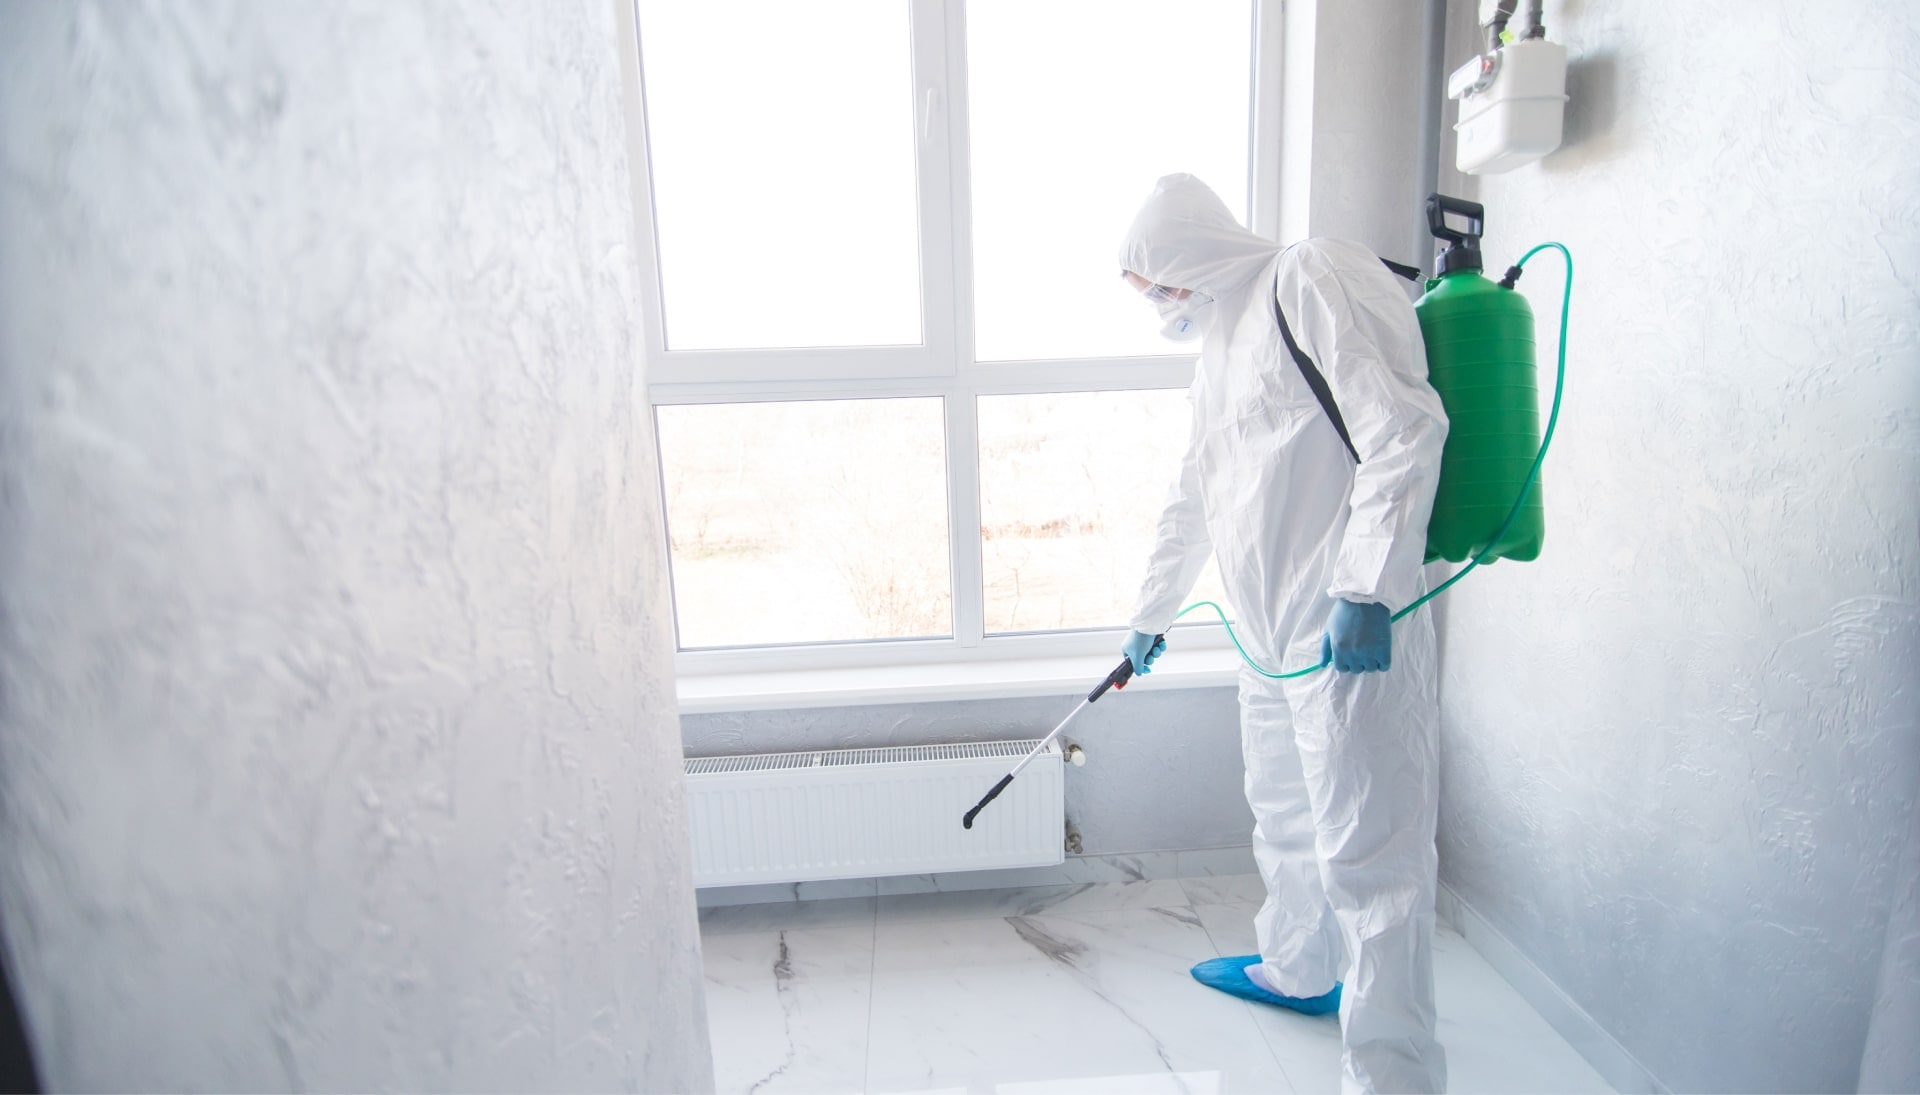 We provide the highest-quality mold inspection, testing, and removal services in the Dallas, Texas area.